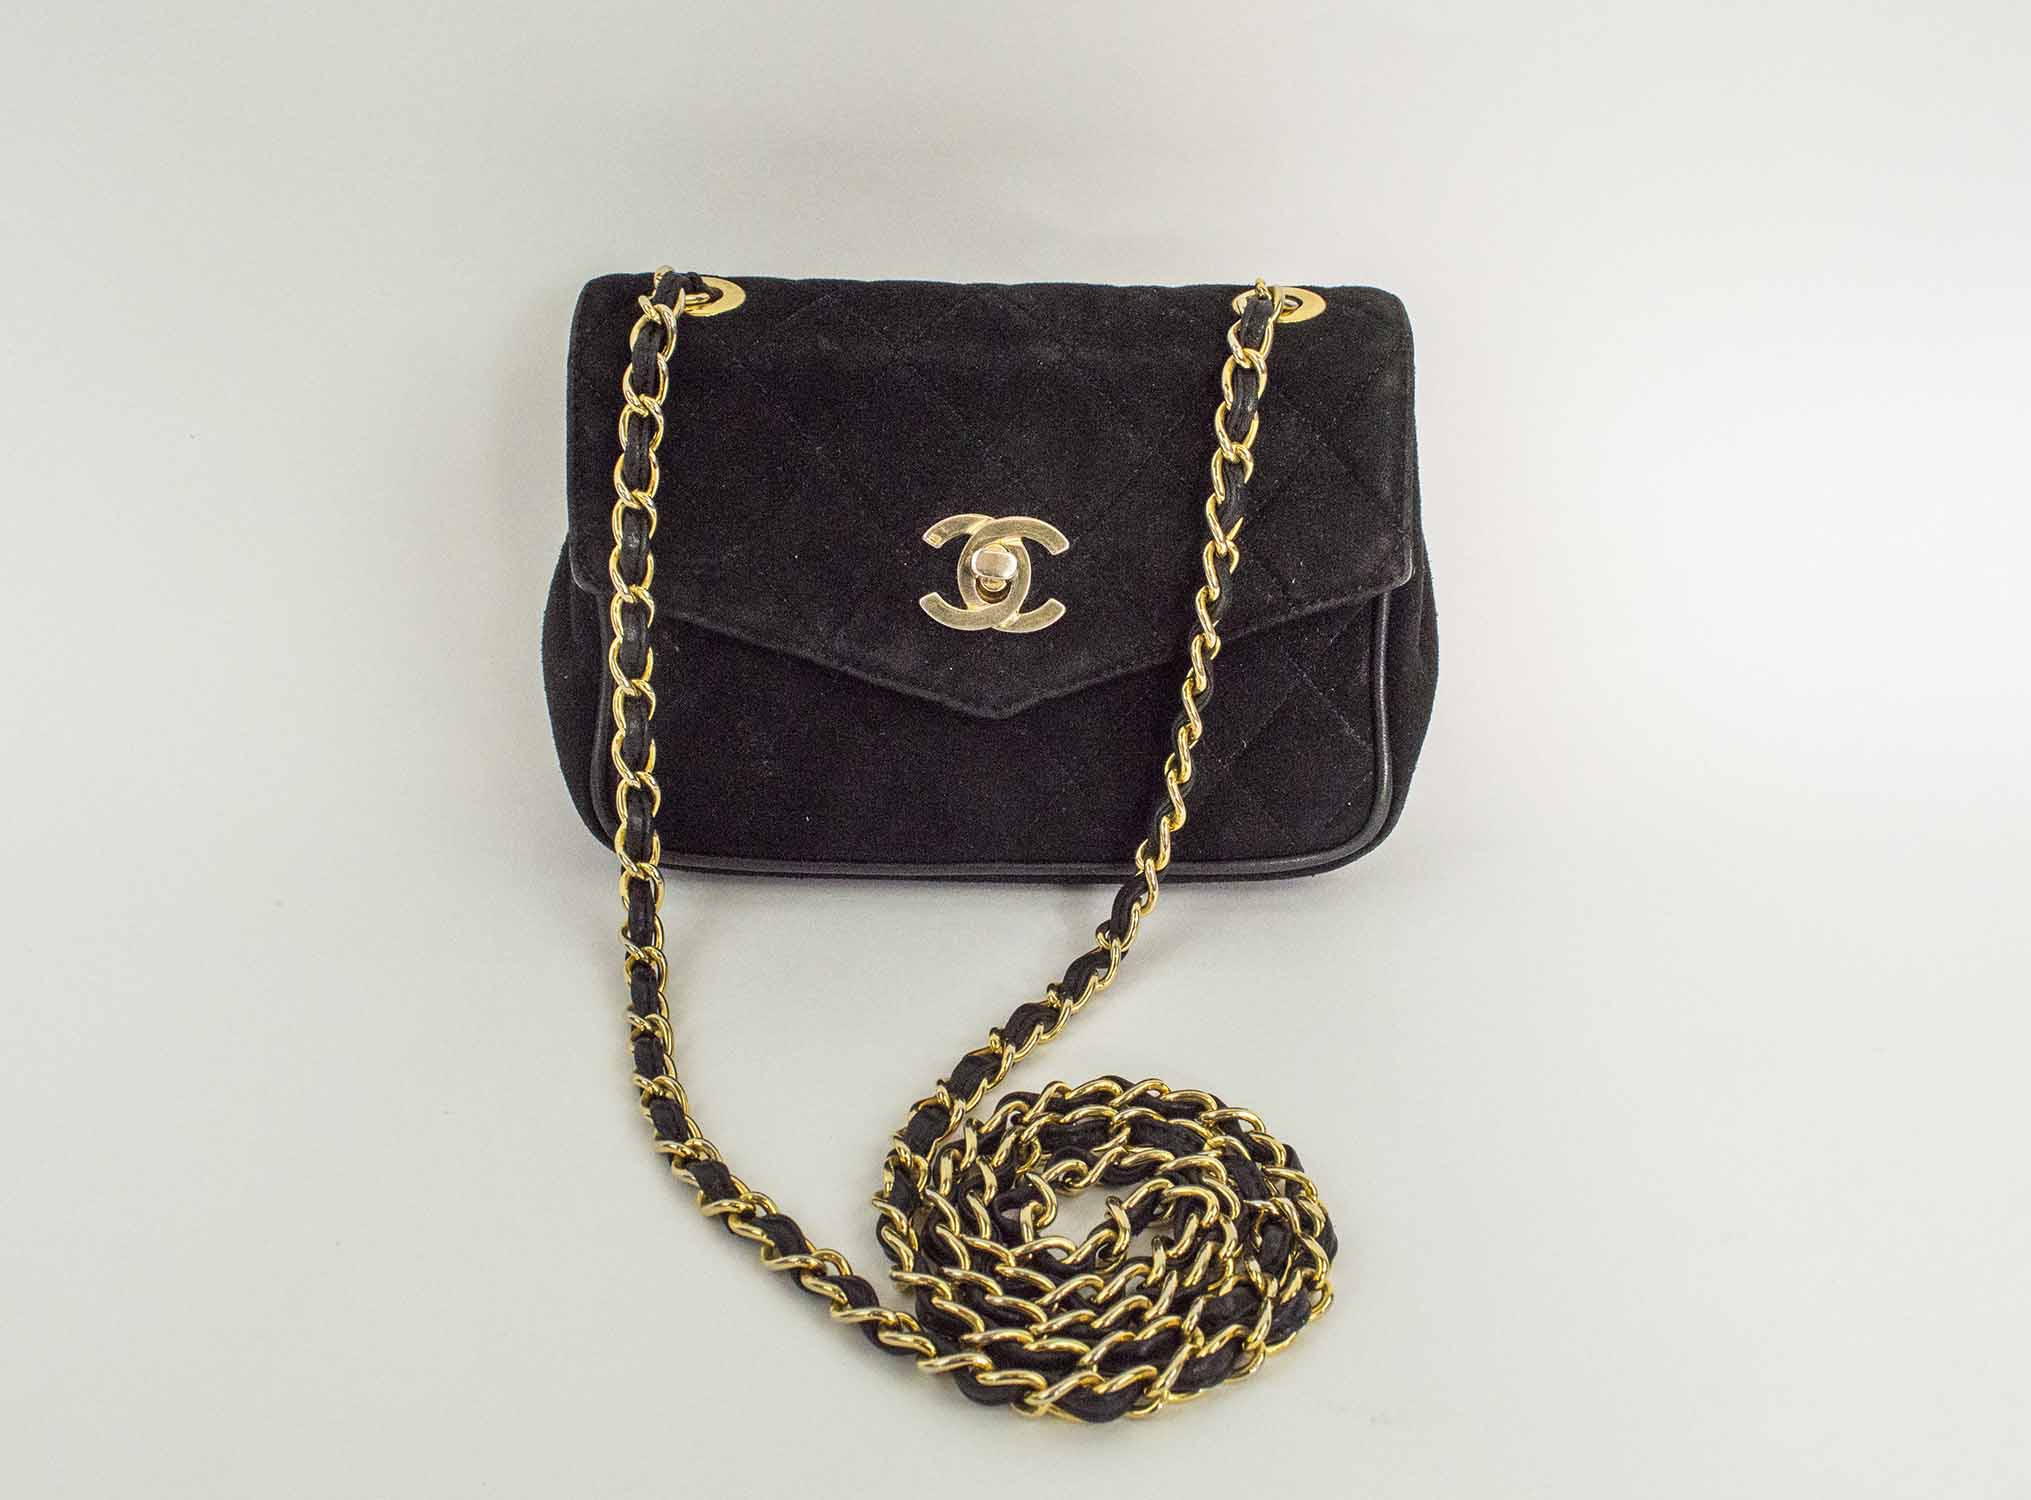 CHANEL VINTAGE SHOULDER/CROSSBODY BAG, iconic diamond quilted black suede  with matching leather interior, interwoven leather and chain strap, 17cm x  11cm H x .